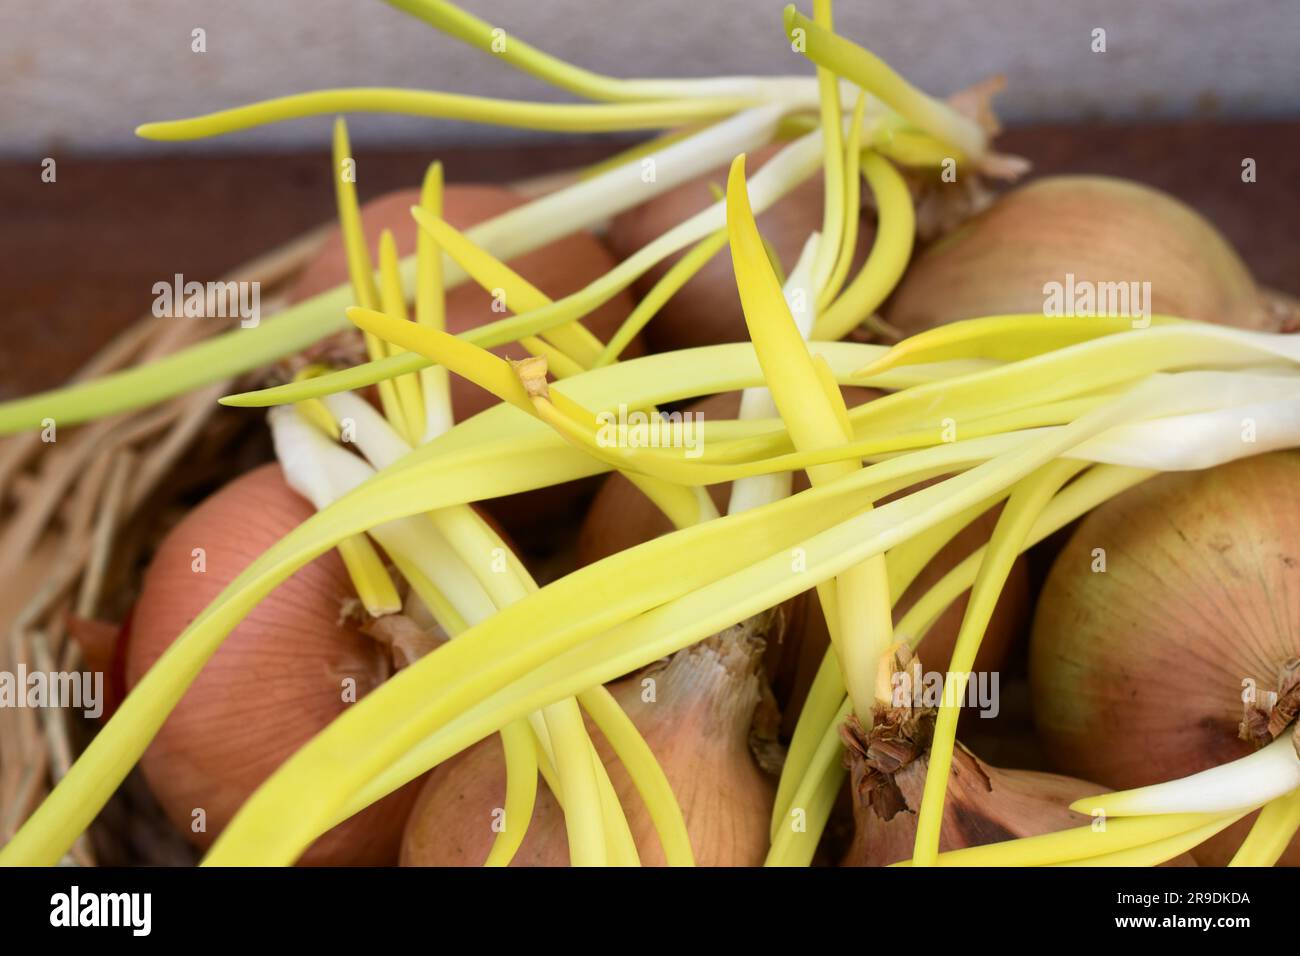 Image of the long yellow shoots of some old onions that are totally useless for cooking Stock Photo